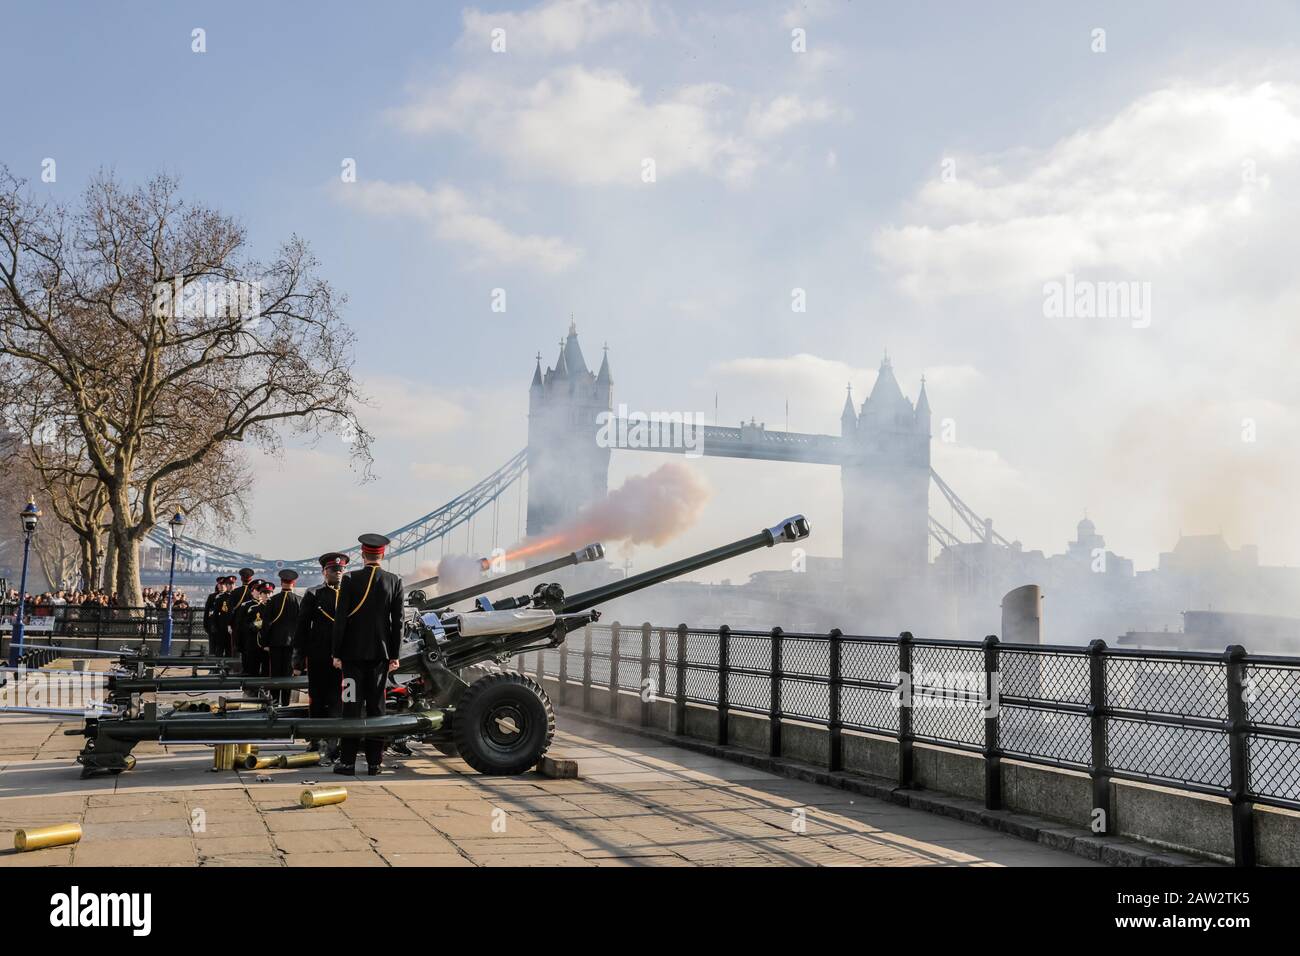 The Tower of London, UK. 6th Feb 2020. The Honourable Artillery Company fire a 62-gun salute at The Tower of London to commemorate the 68th Anniversary of the Accession of Her Majesty The Queen. A Royal Salute normally comprises 21 guns, this is increased to 41 if fired from a Royal Park or Residence. Uniquely, at The Tower of London which is a Royal Residence, a total of 62 rounds are fired on Royal anniversaries as this also includes an additional 21 guns for the citizens of the City of London to show their loyalty to the Monarch. Credit: Chris Aubrey/Alamy Live News Stock Photo